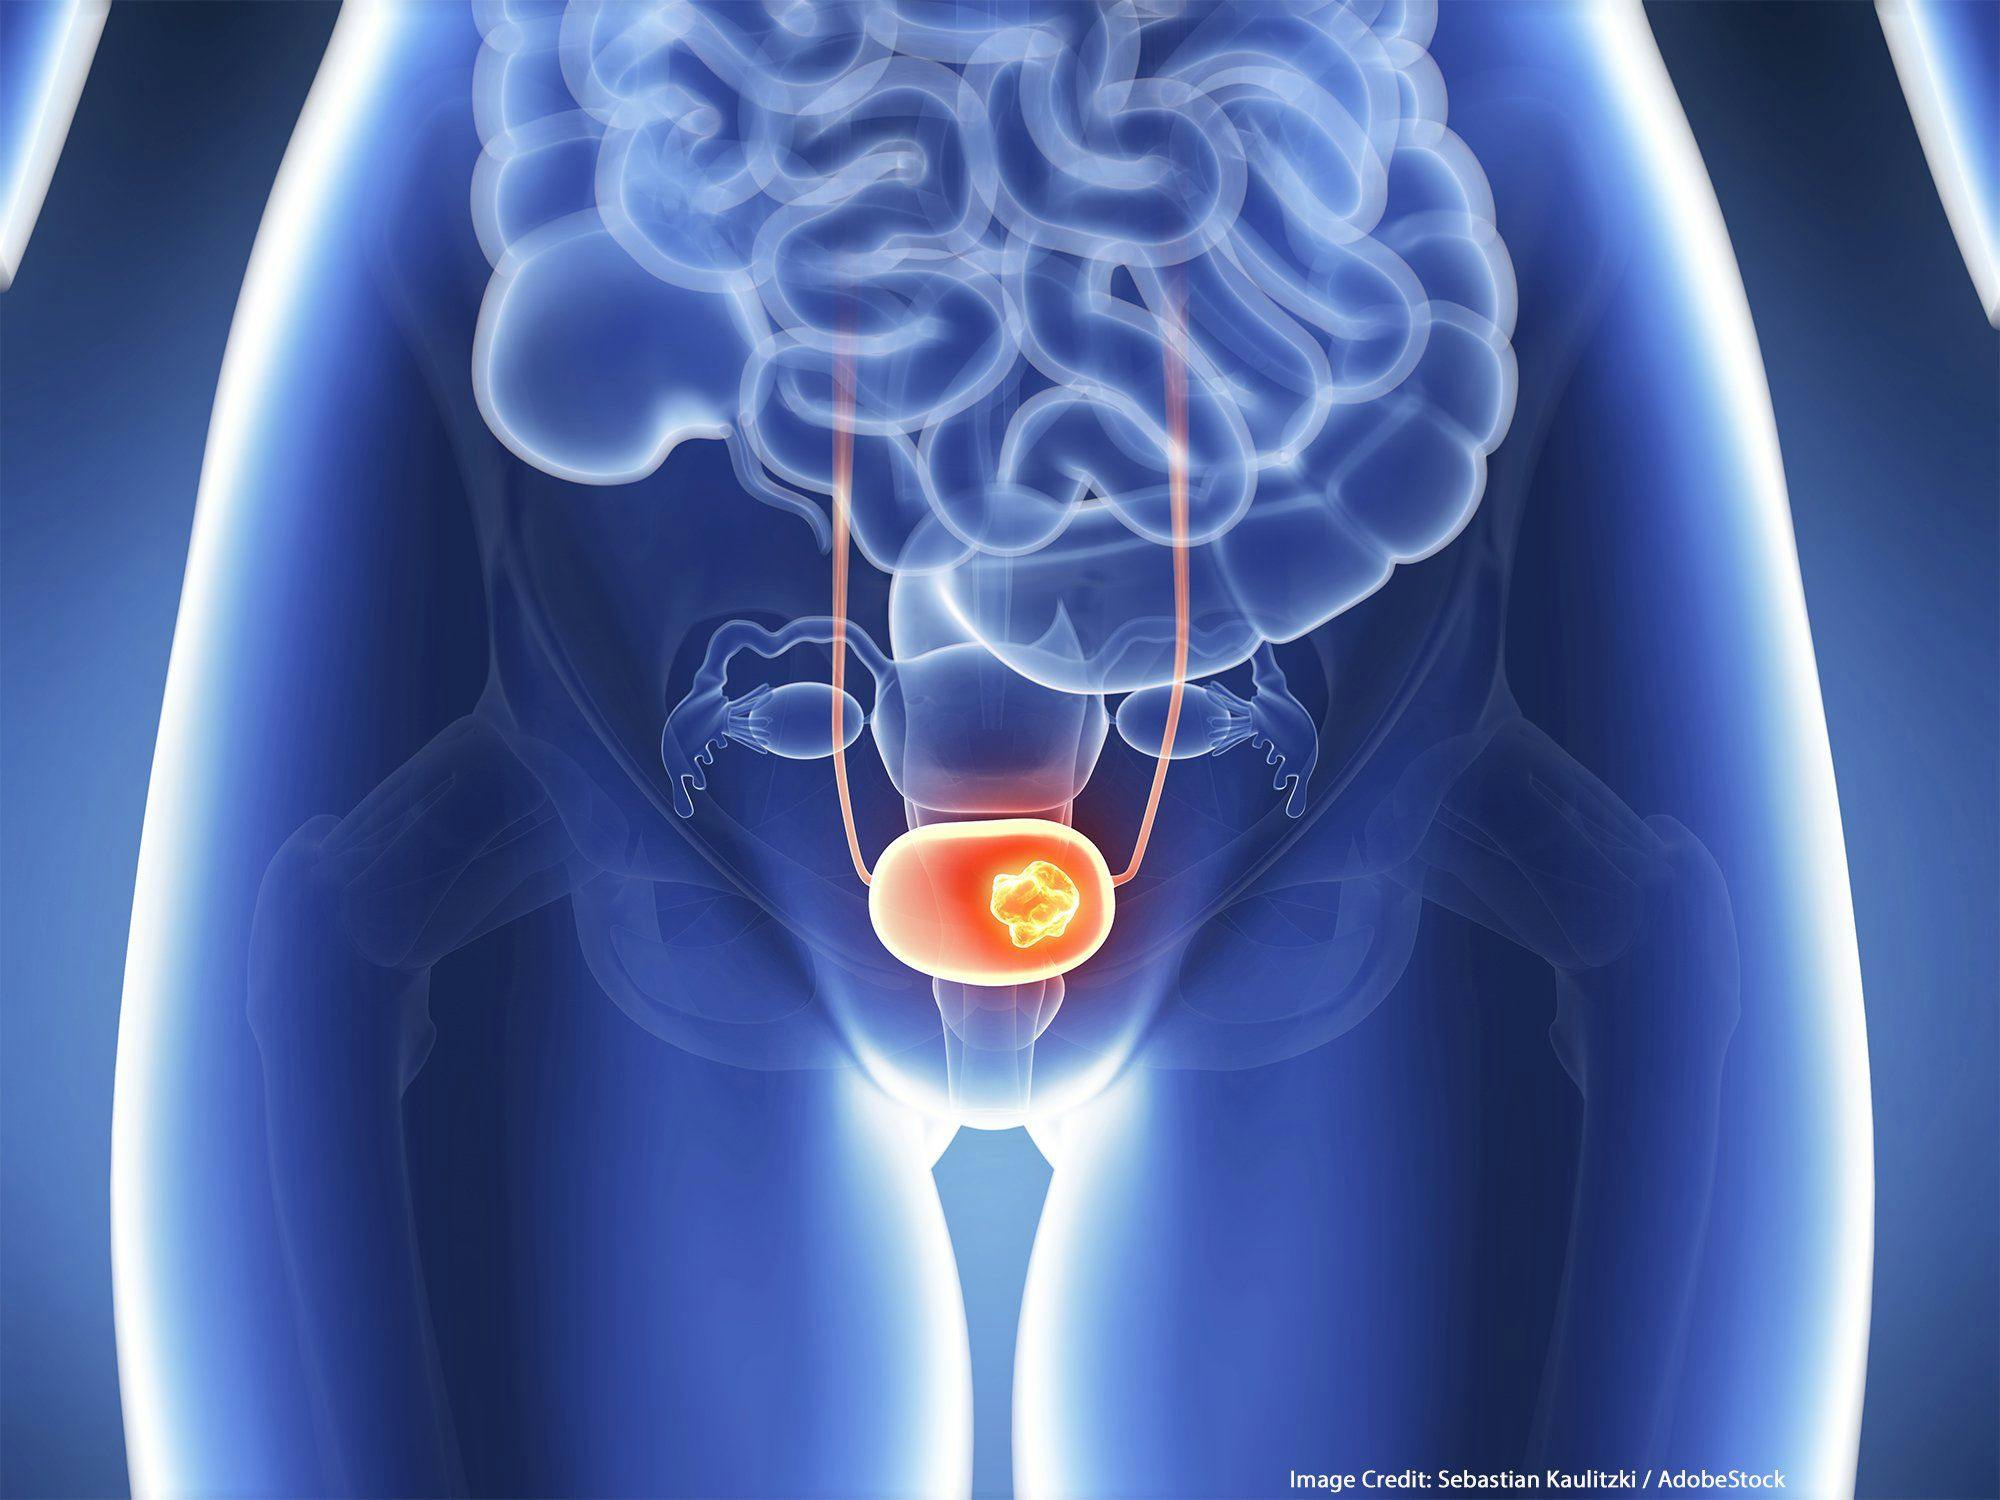 NCCN: New Bladder Cancer Guidelines Include Updated Staging, Immunotherapy Options